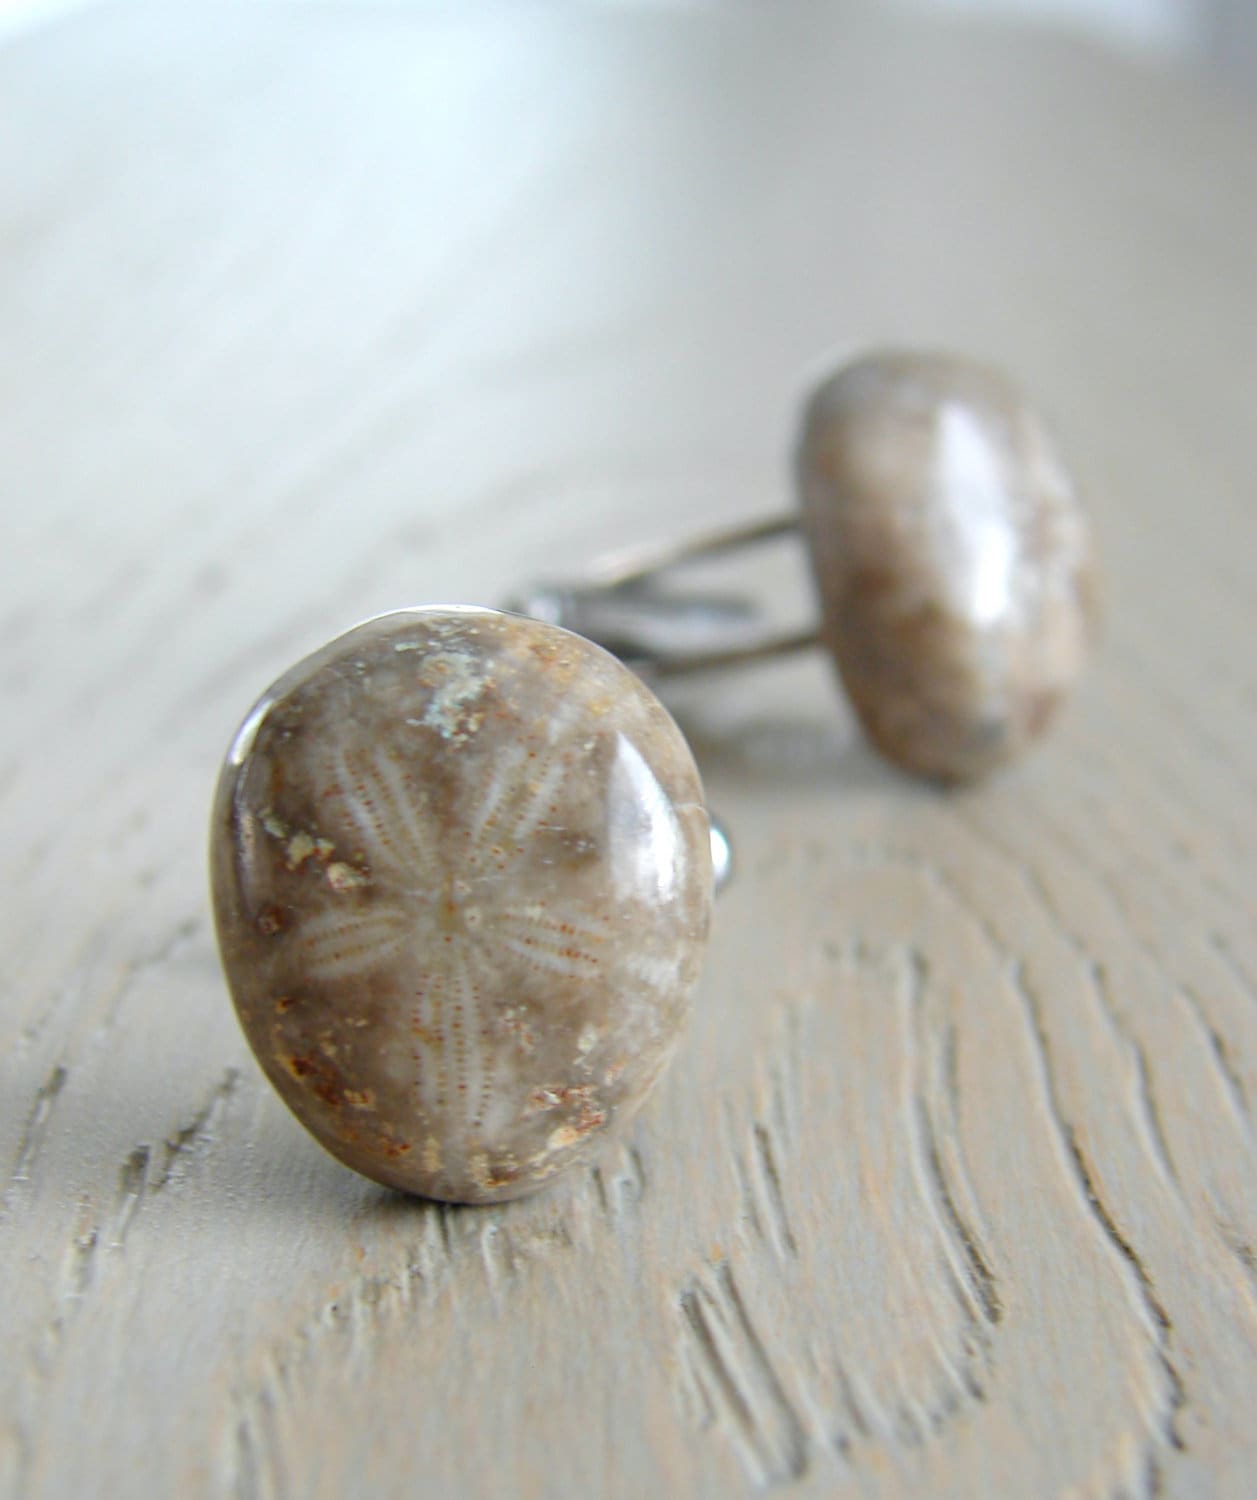 Sand Dollar Fossil Cufflinks, Natural Stone Mens Jewelry, Gift for Geologist or a Beach Wedding Groom, Cool Fathers Day Gift for Everyday